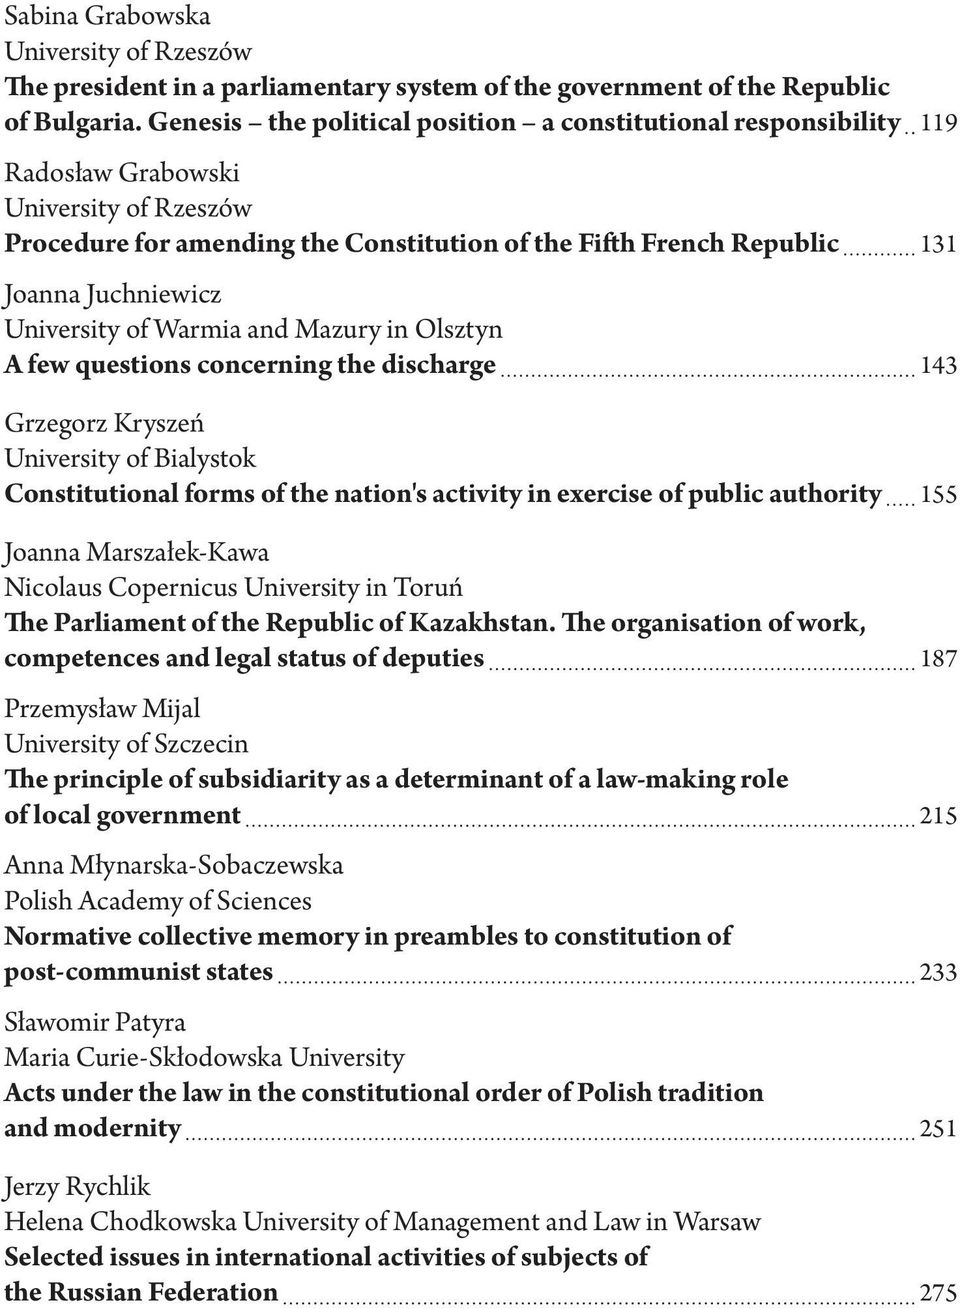 University of Warmia and Mazury in Olsztyn A few questions concerning the discharge 143 Grzegorz Kryszeń University of Bialystok Constitutional forms of the nation's activity in exercise of public